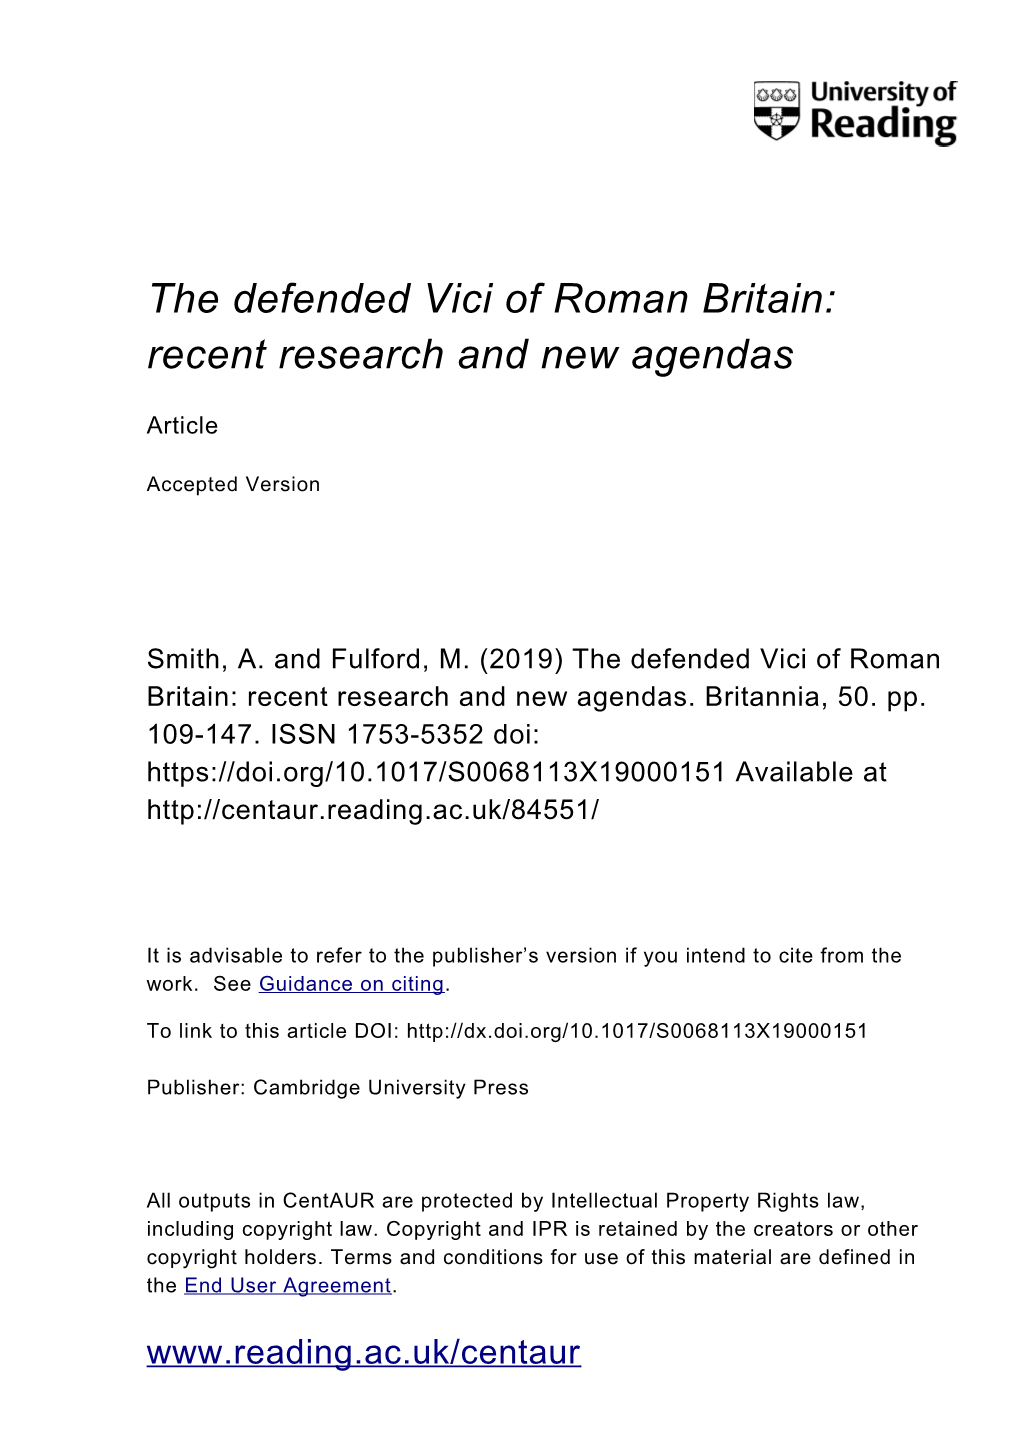 The Defended Vici of Roman Britain: Recent Research and New Agendas